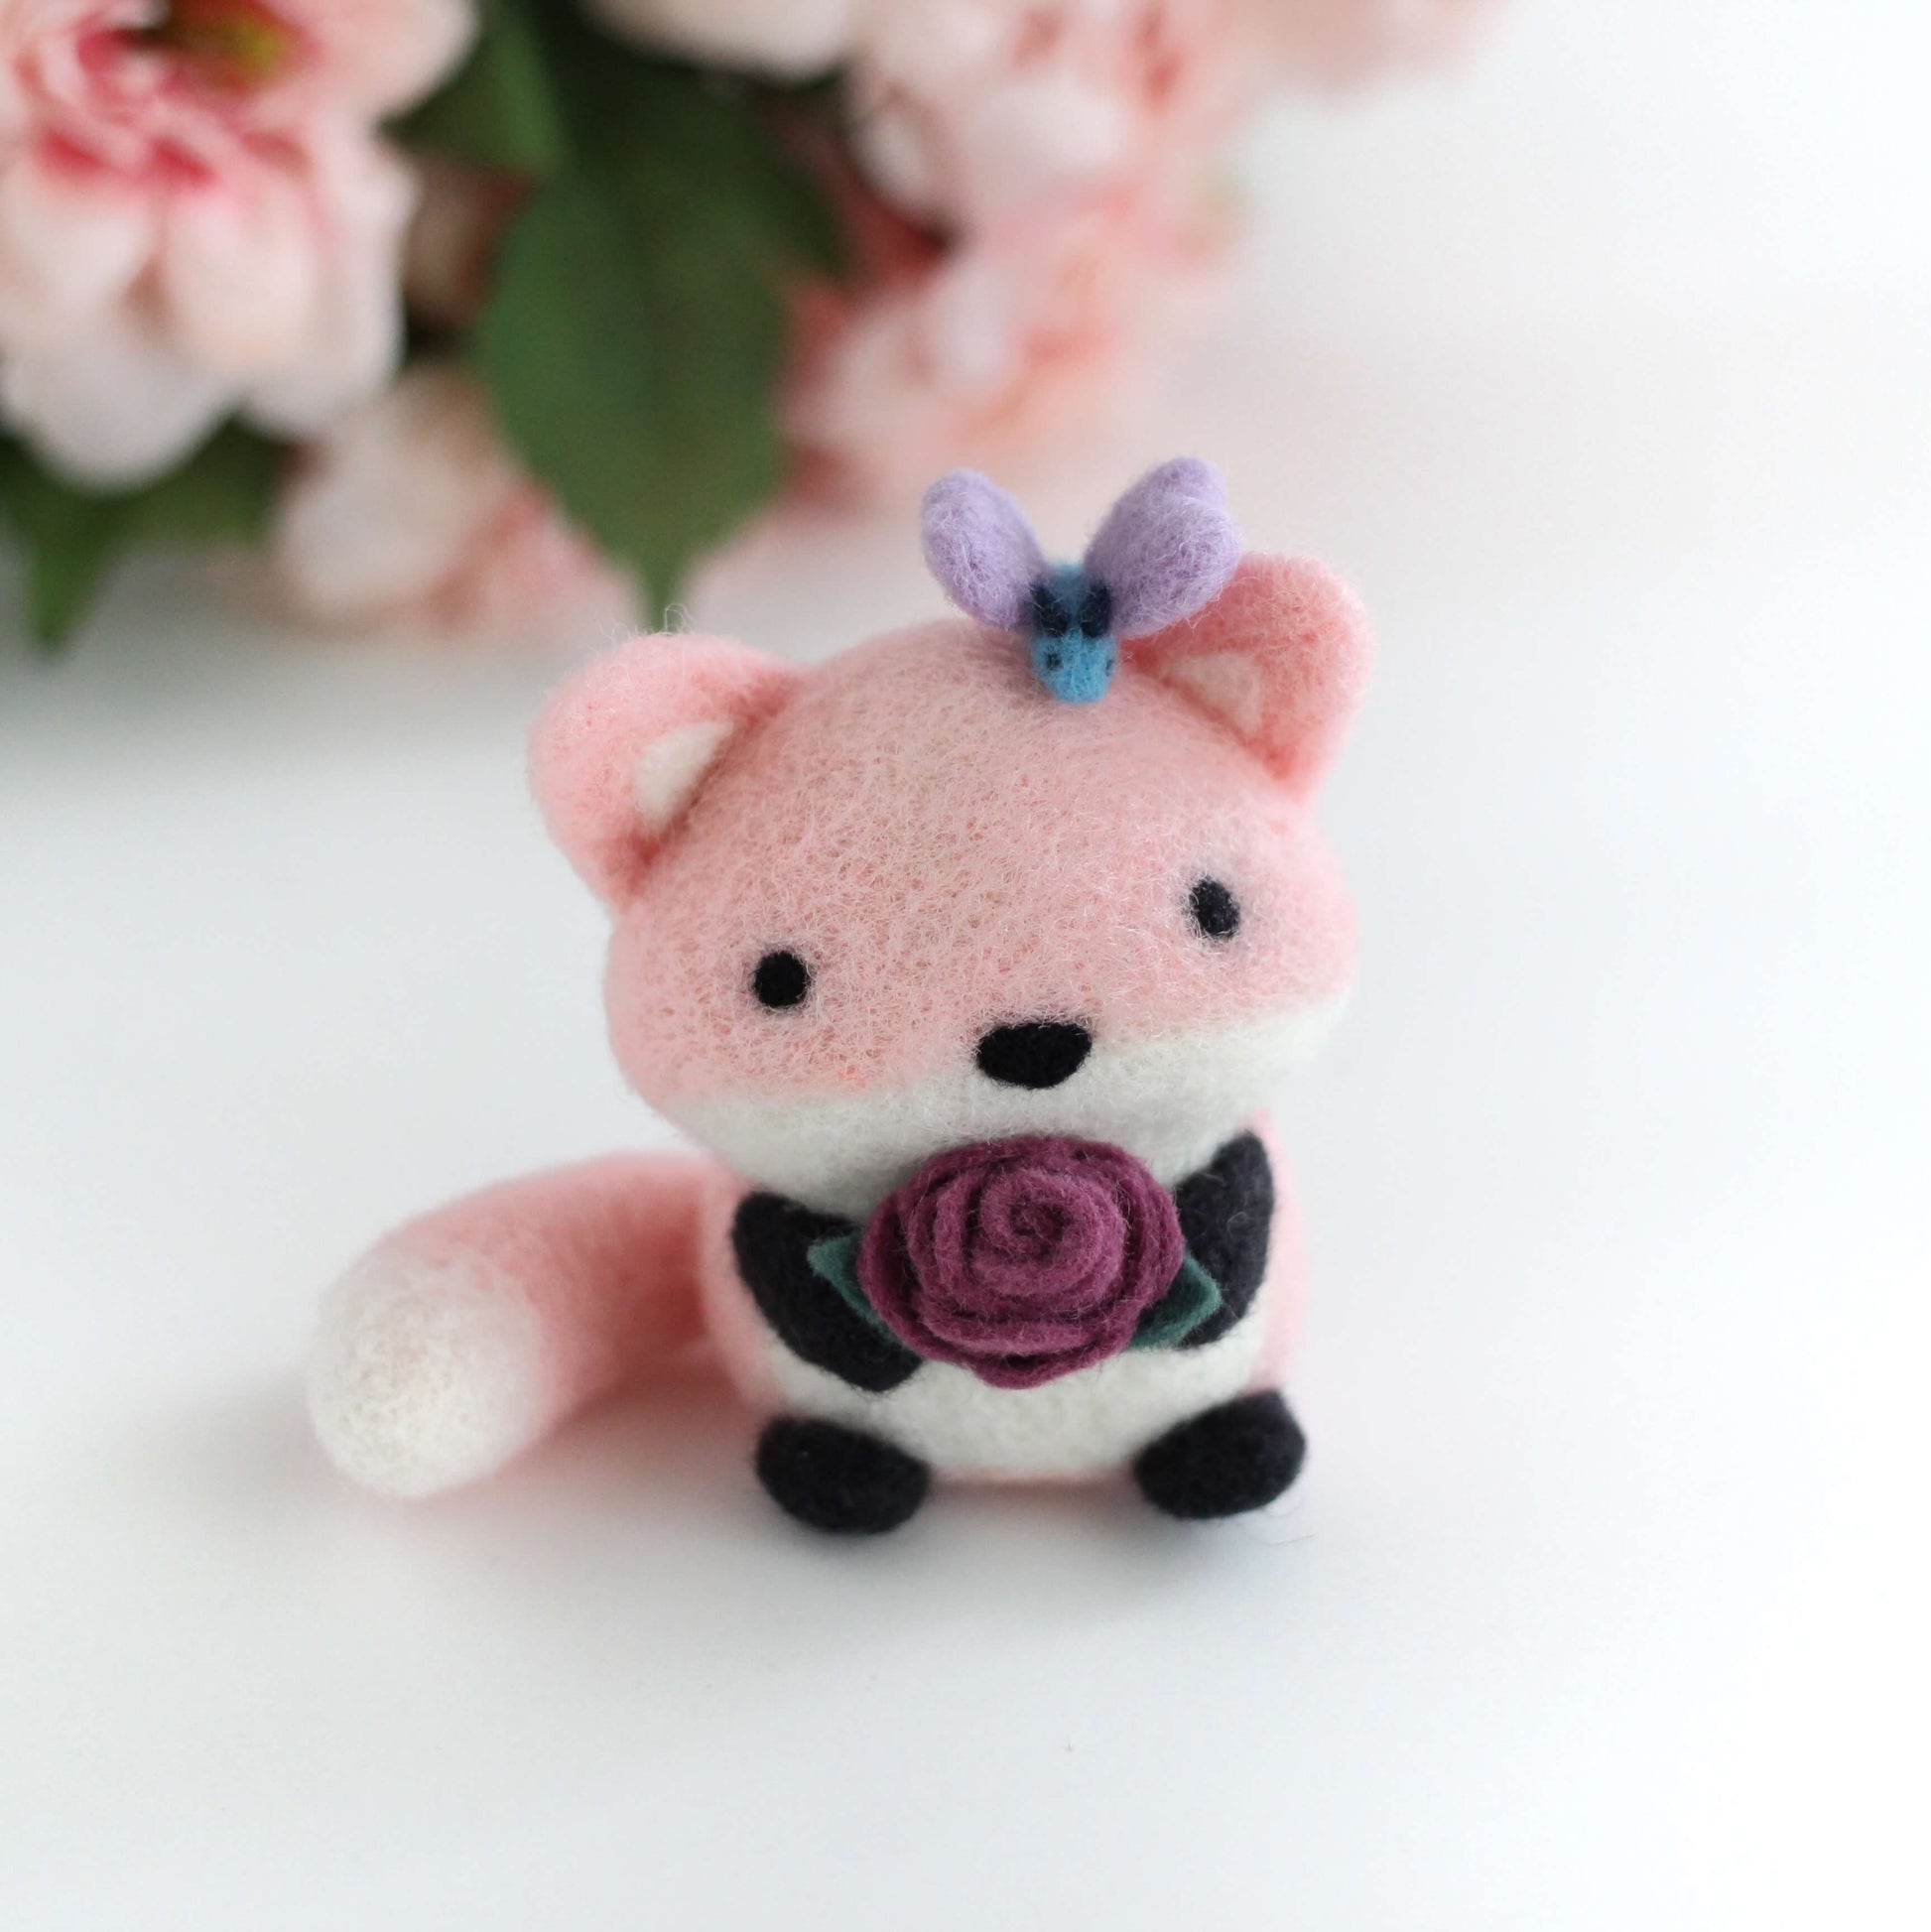 Needle Felted Pink Fox with Butterfly Friend and Rose by Wild Whimsy Woolies